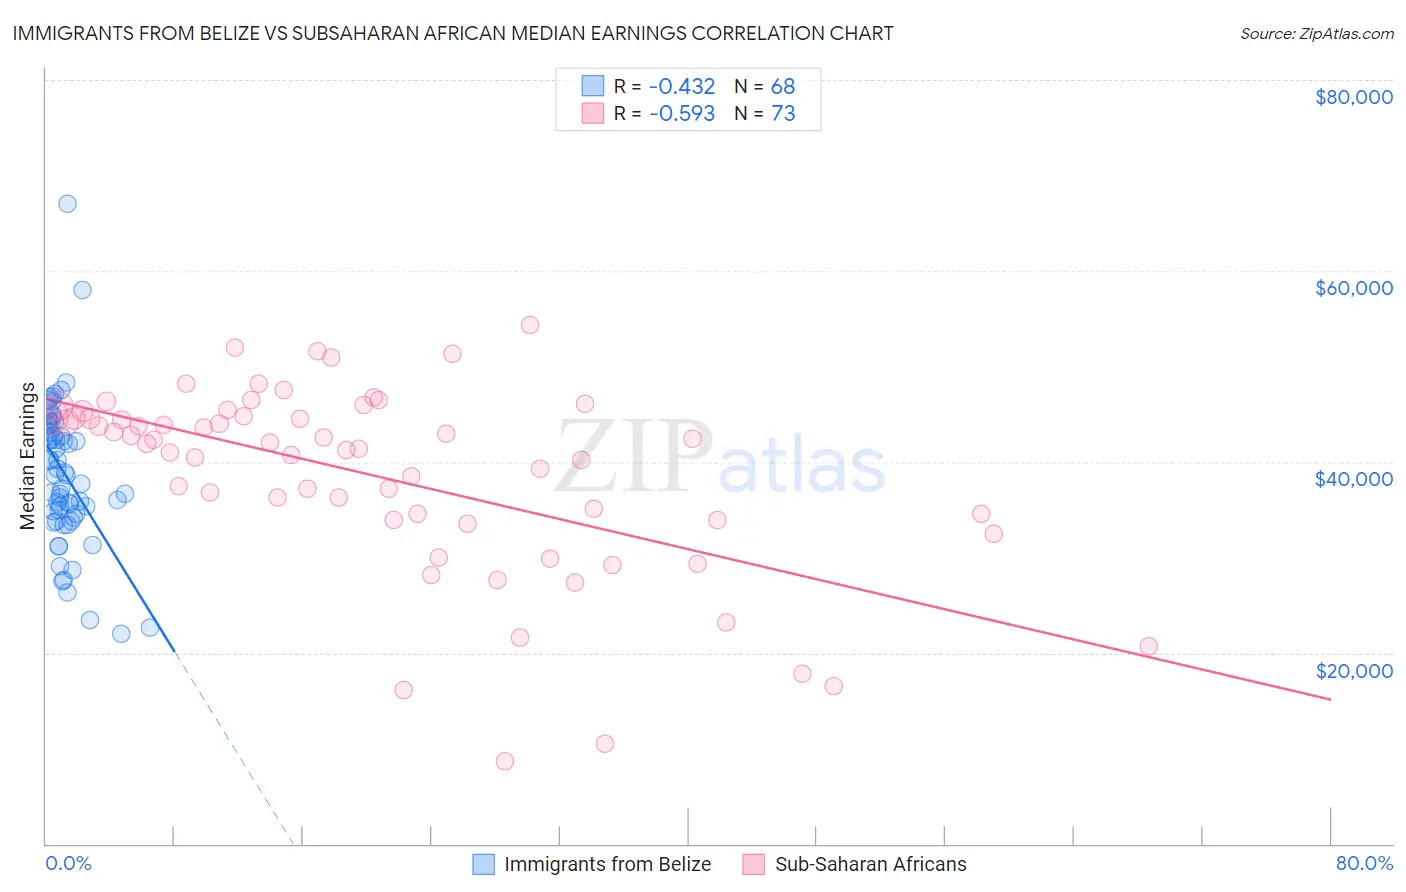 Immigrants from Belize vs Subsaharan African Median Earnings